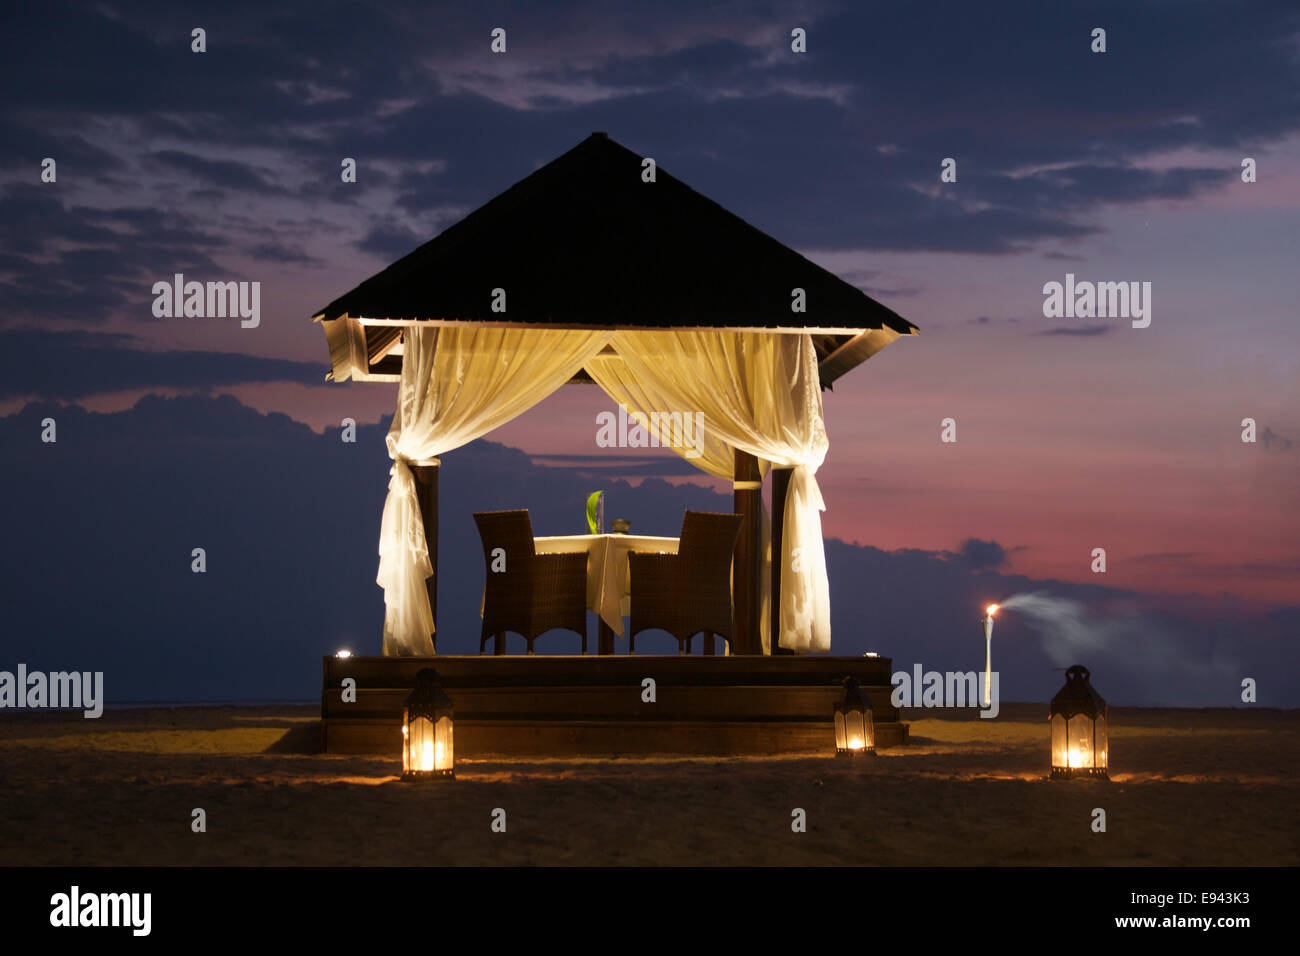 Lit romantic setting a supper table set for two Gili Trawangan Lombok Indonesia Stock Photo